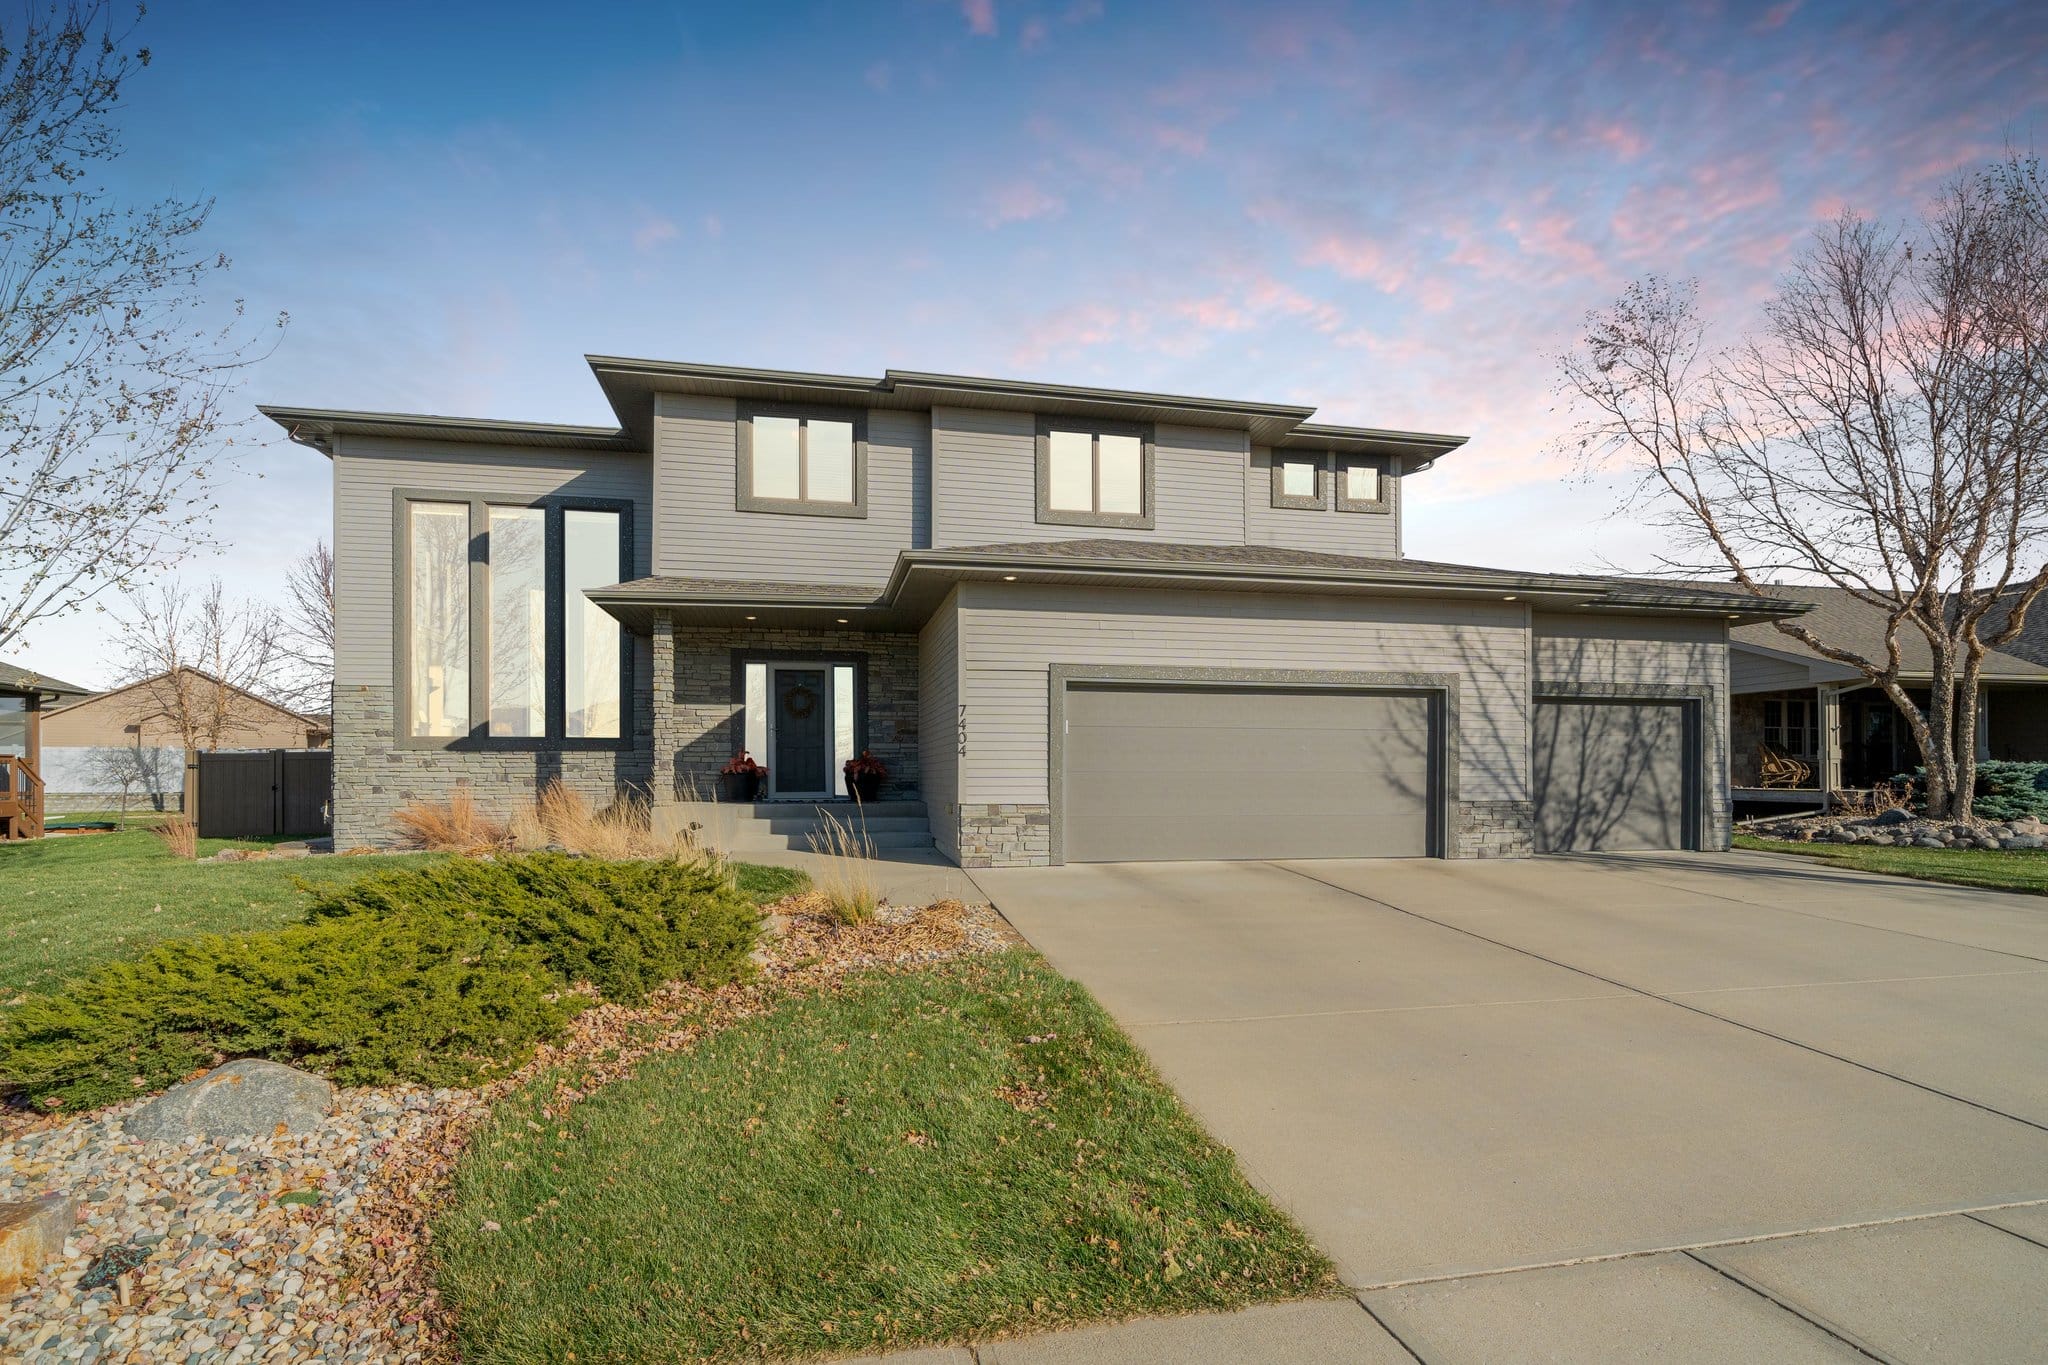 Modern two-story in south Sioux Falls offers luxury blended with convenience